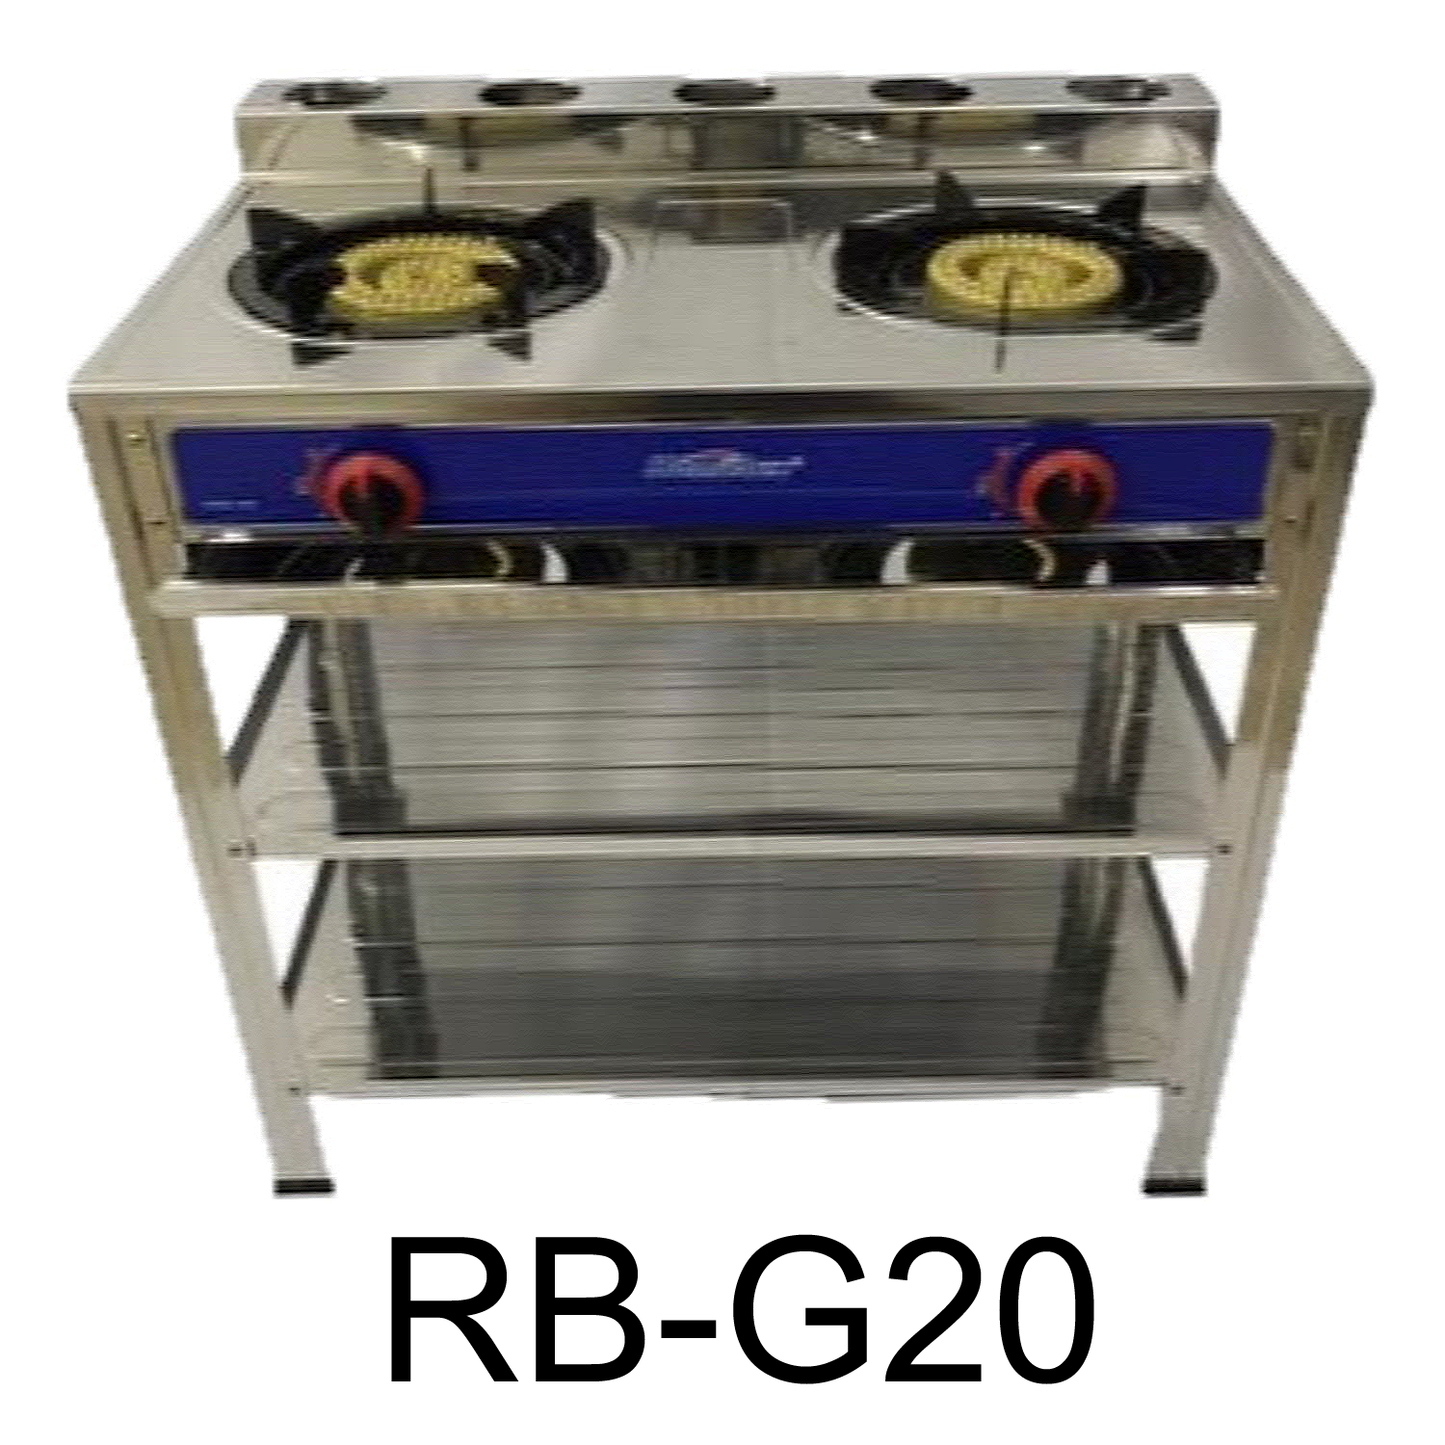 Double Burners Gas Stove Table